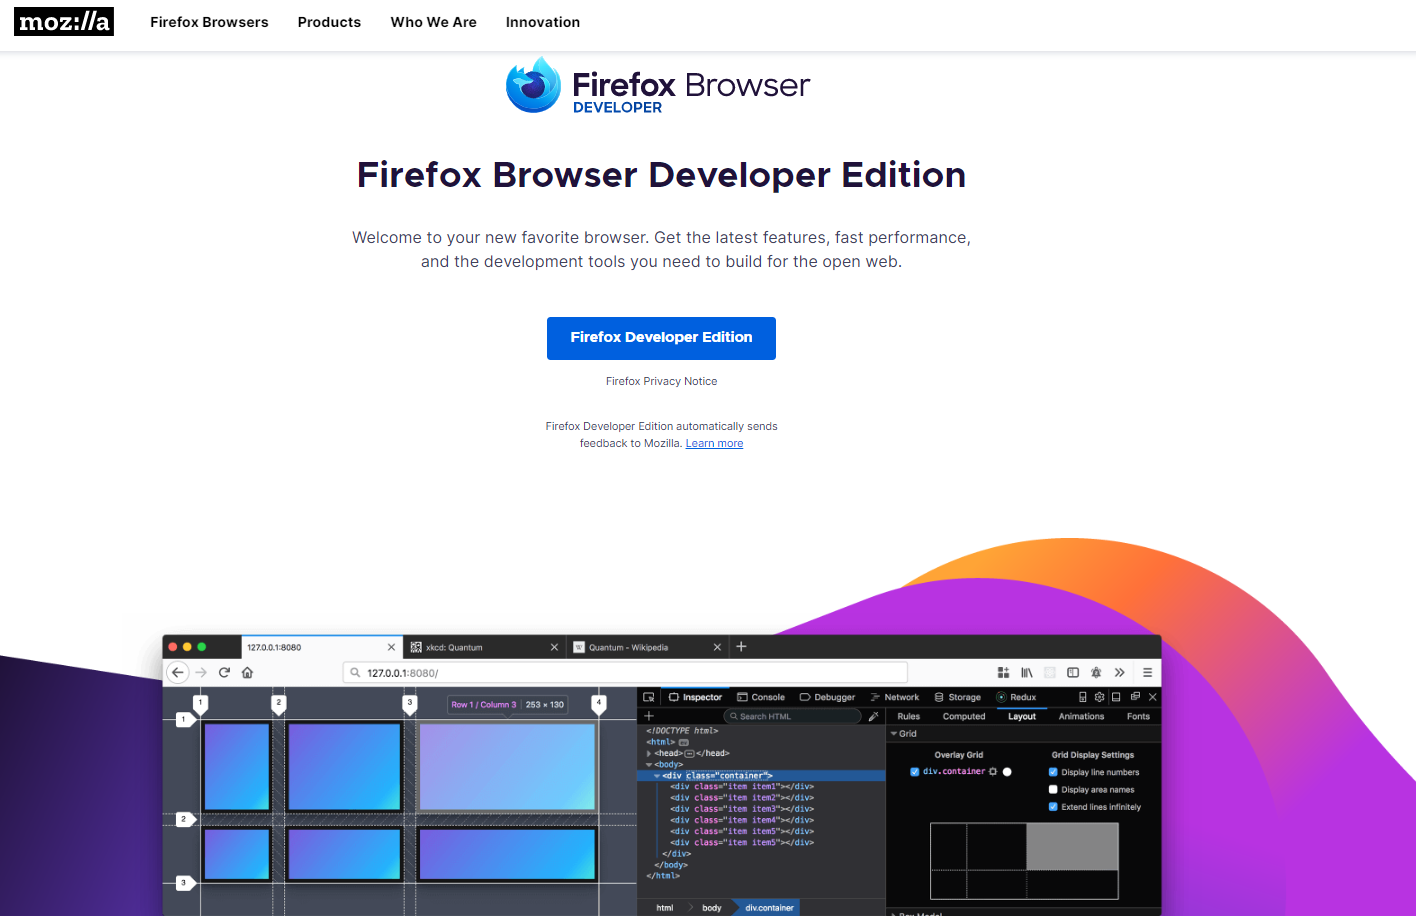 Firefox Browser Developer Edition is a tool that helps programmers in website development